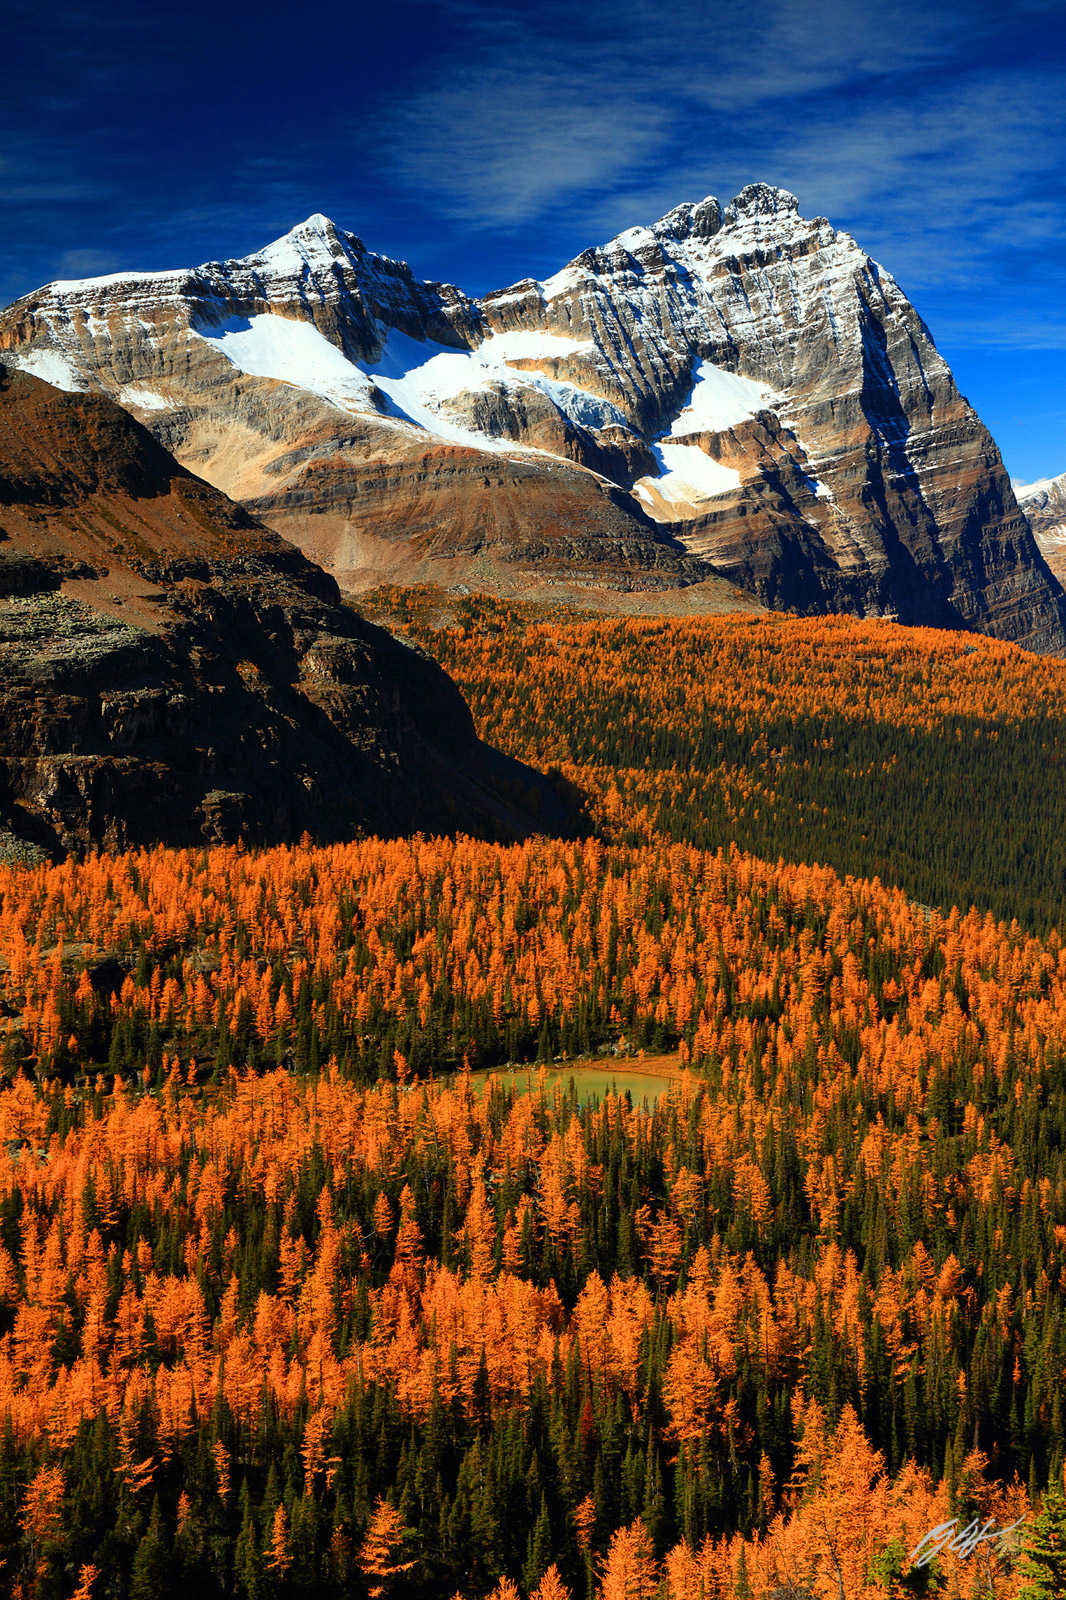 Golden Larch and Odaray Mountain in the Lake O'Hara Region of Yoho National Park in Canada